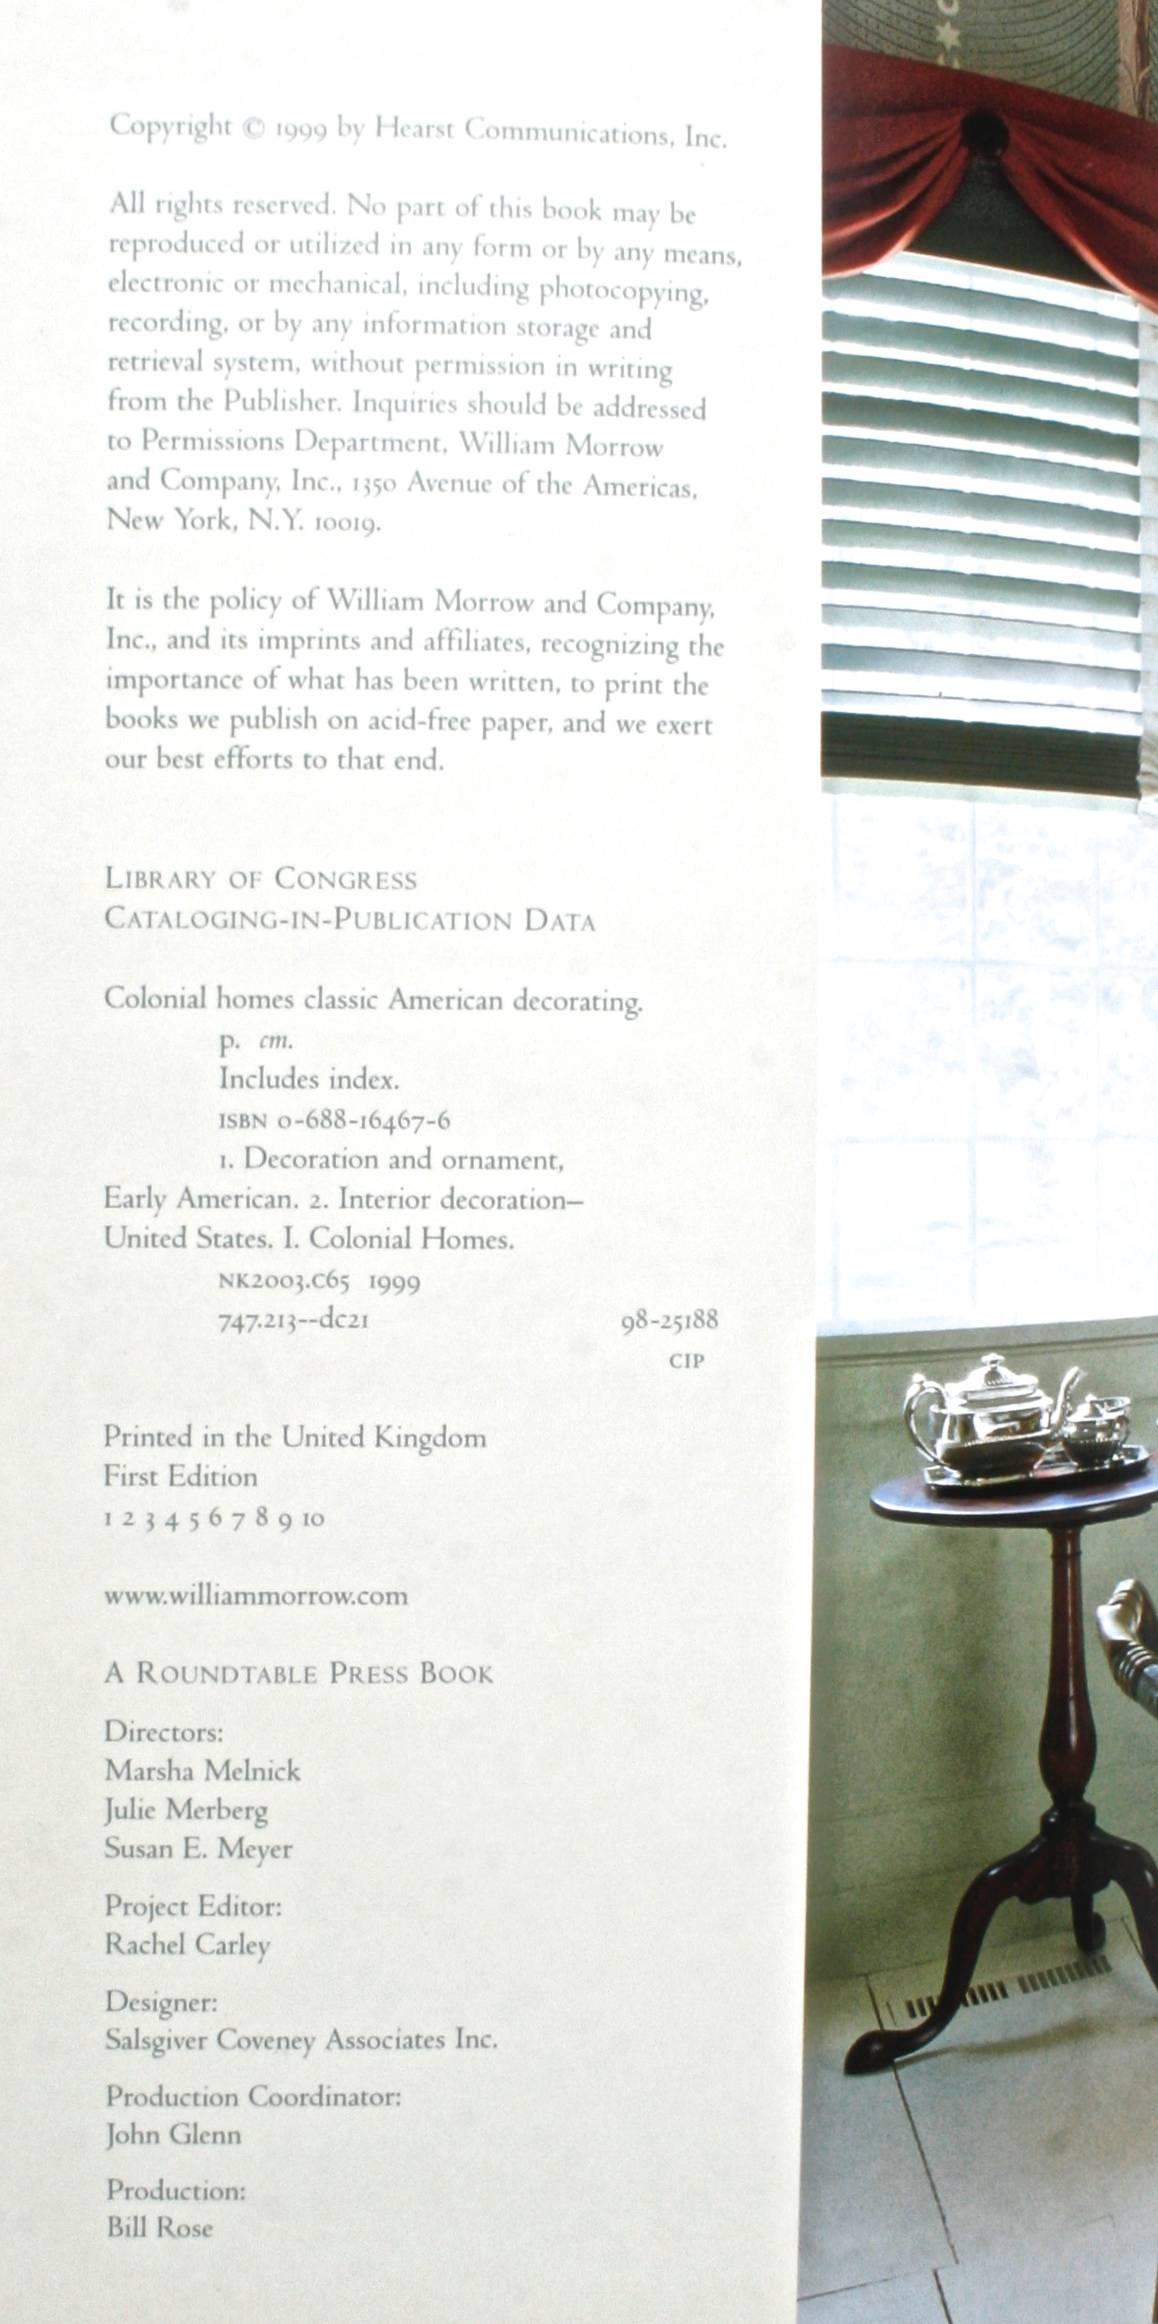 Classic American Decorating by Colonial Homes, First Edition 14